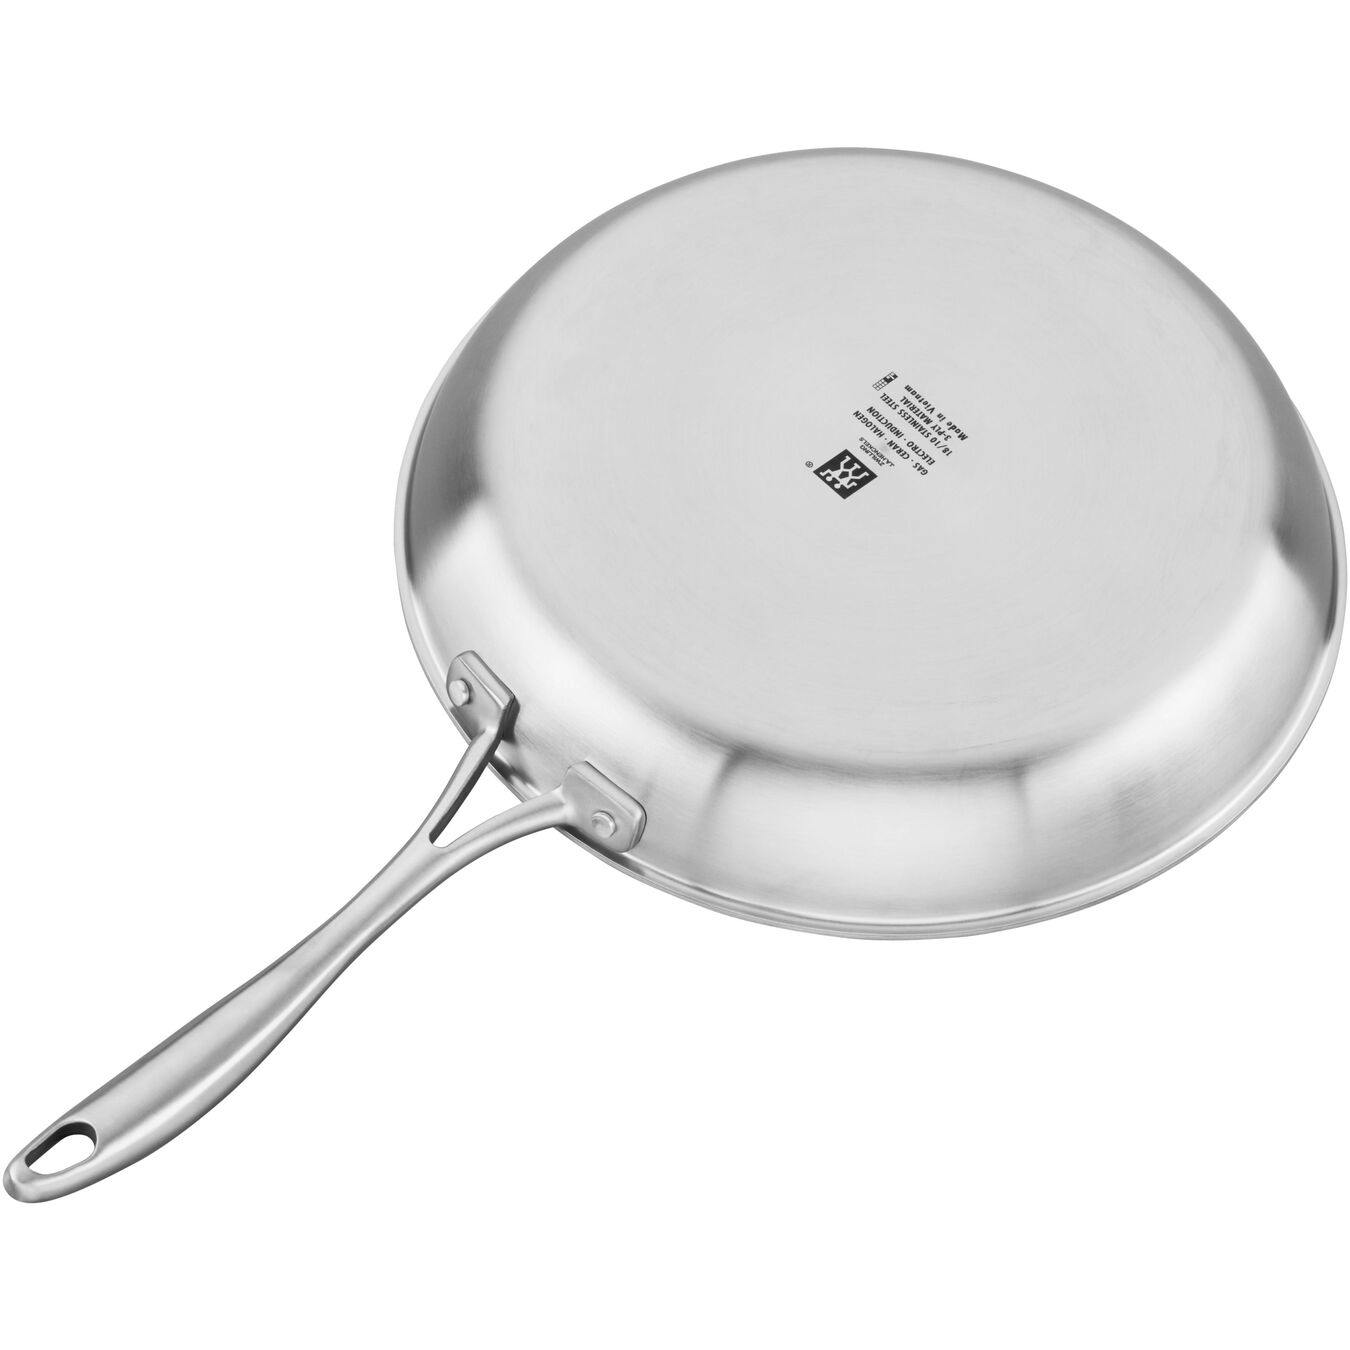 ZWILLING Spirit Stainless Fry Pan, 8-inch, Stainless Steel